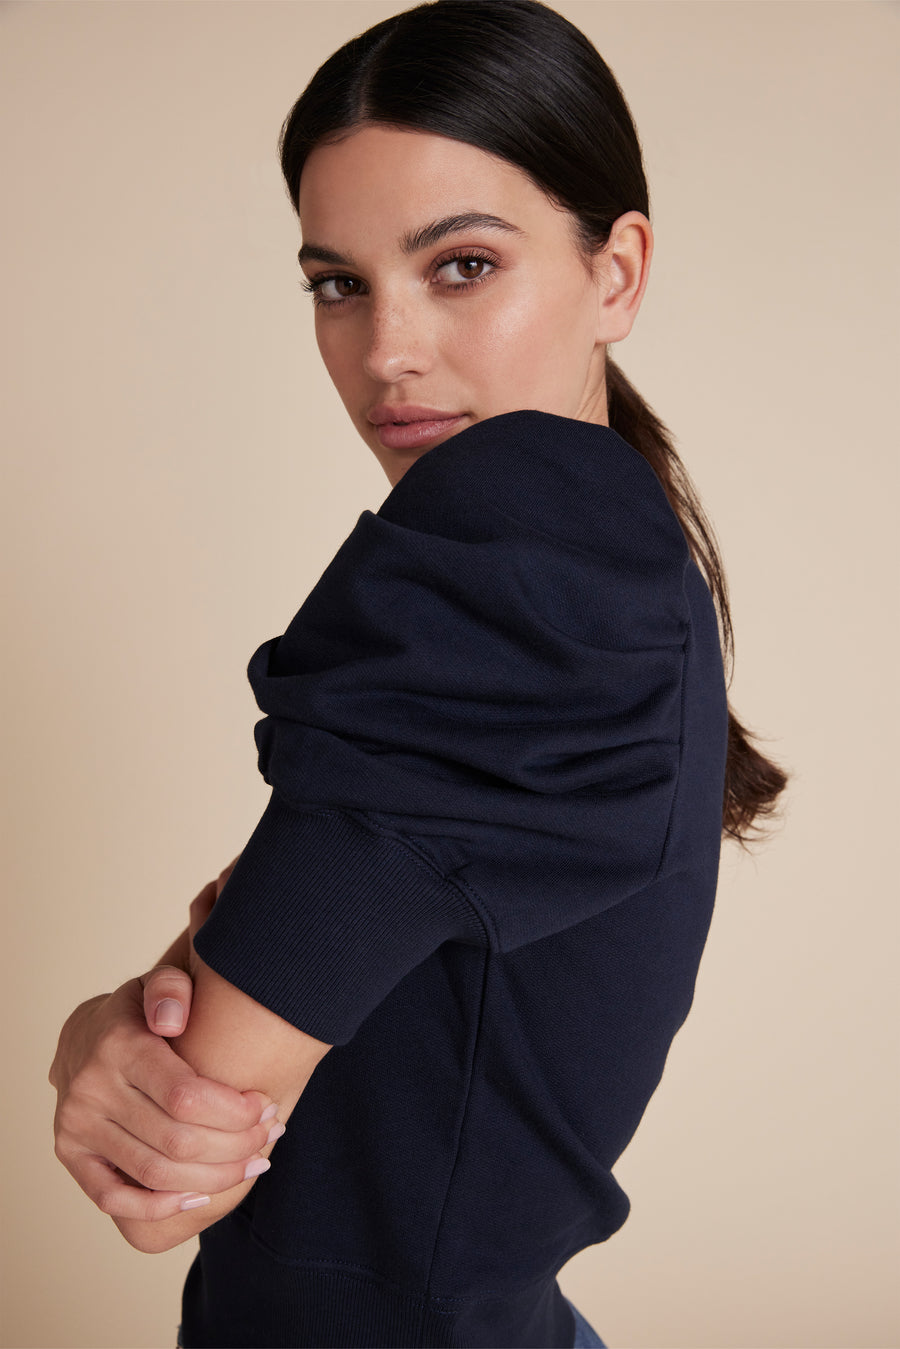 The Just Enough Puff Short Sleeve Sweatshirt in Navy